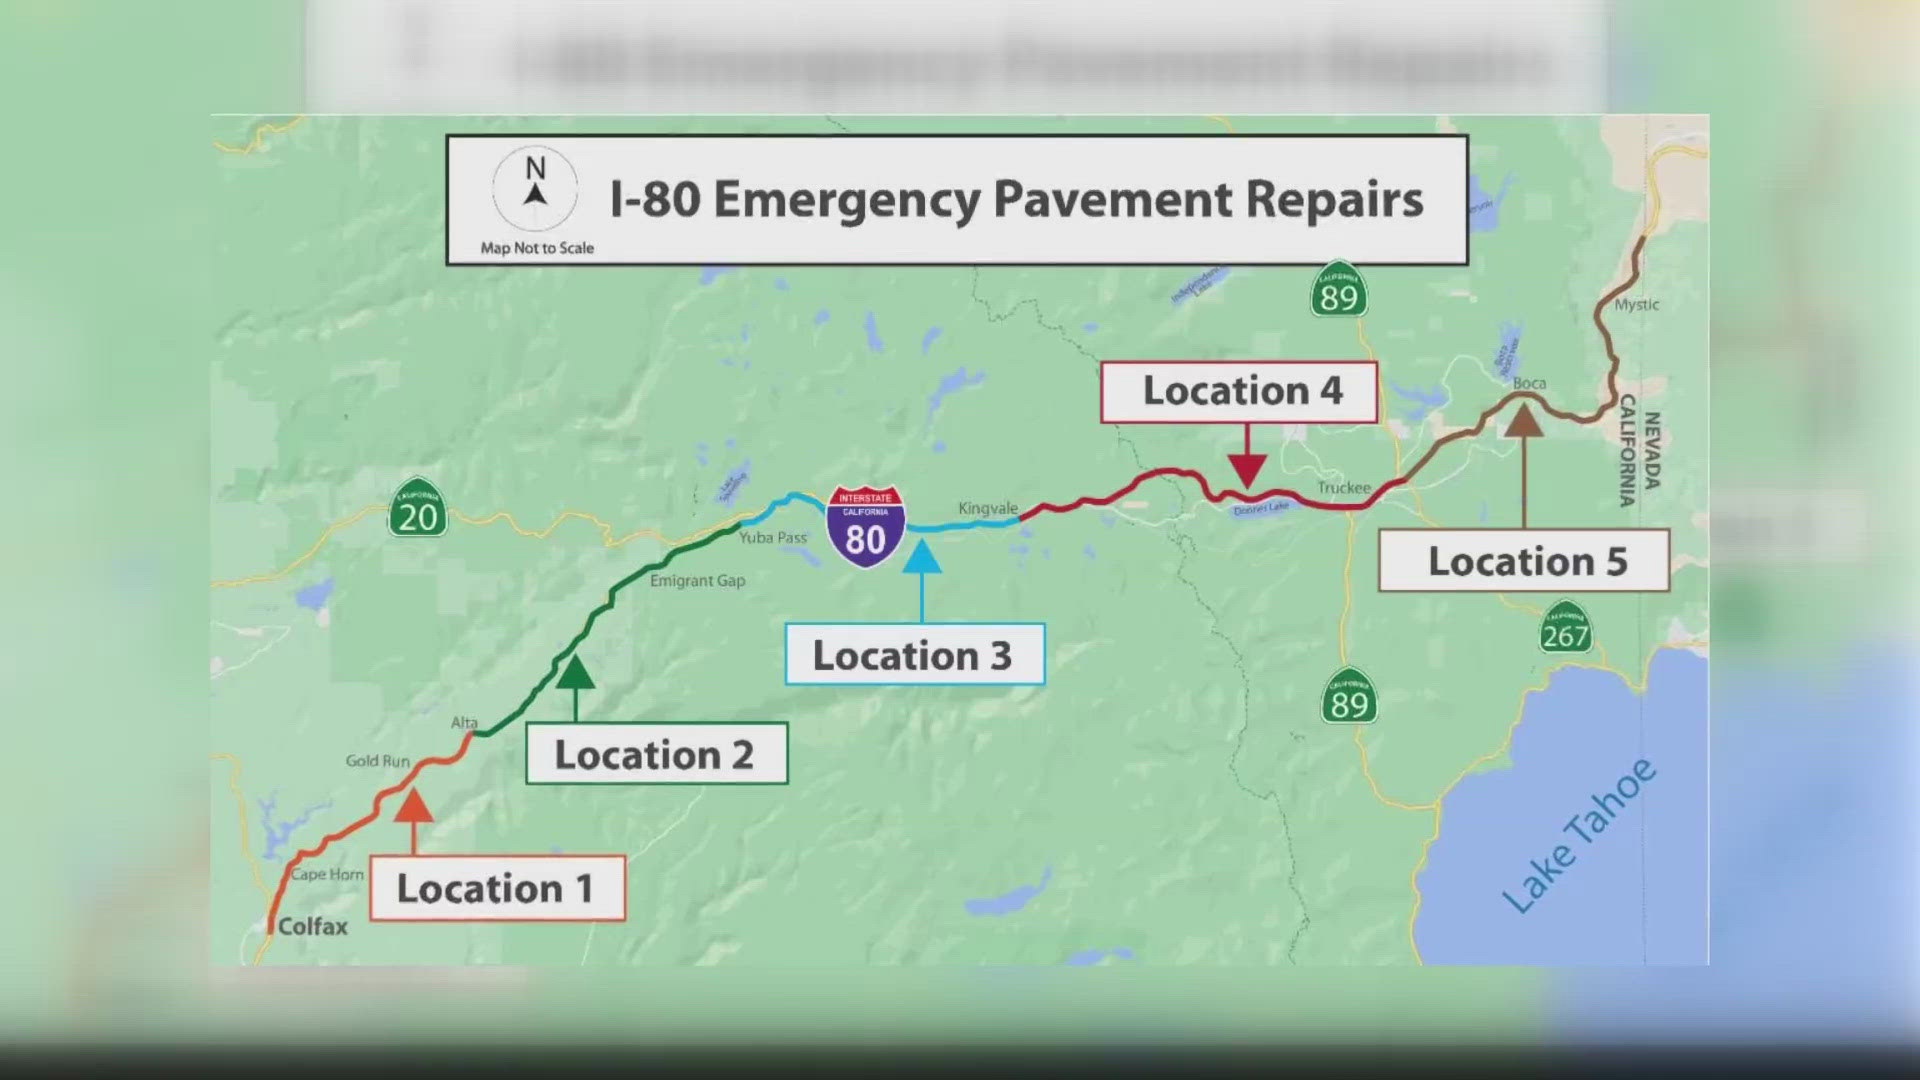 Pavement repairs are scheduled to happen along I-80 between Alta and the Nevada state line.